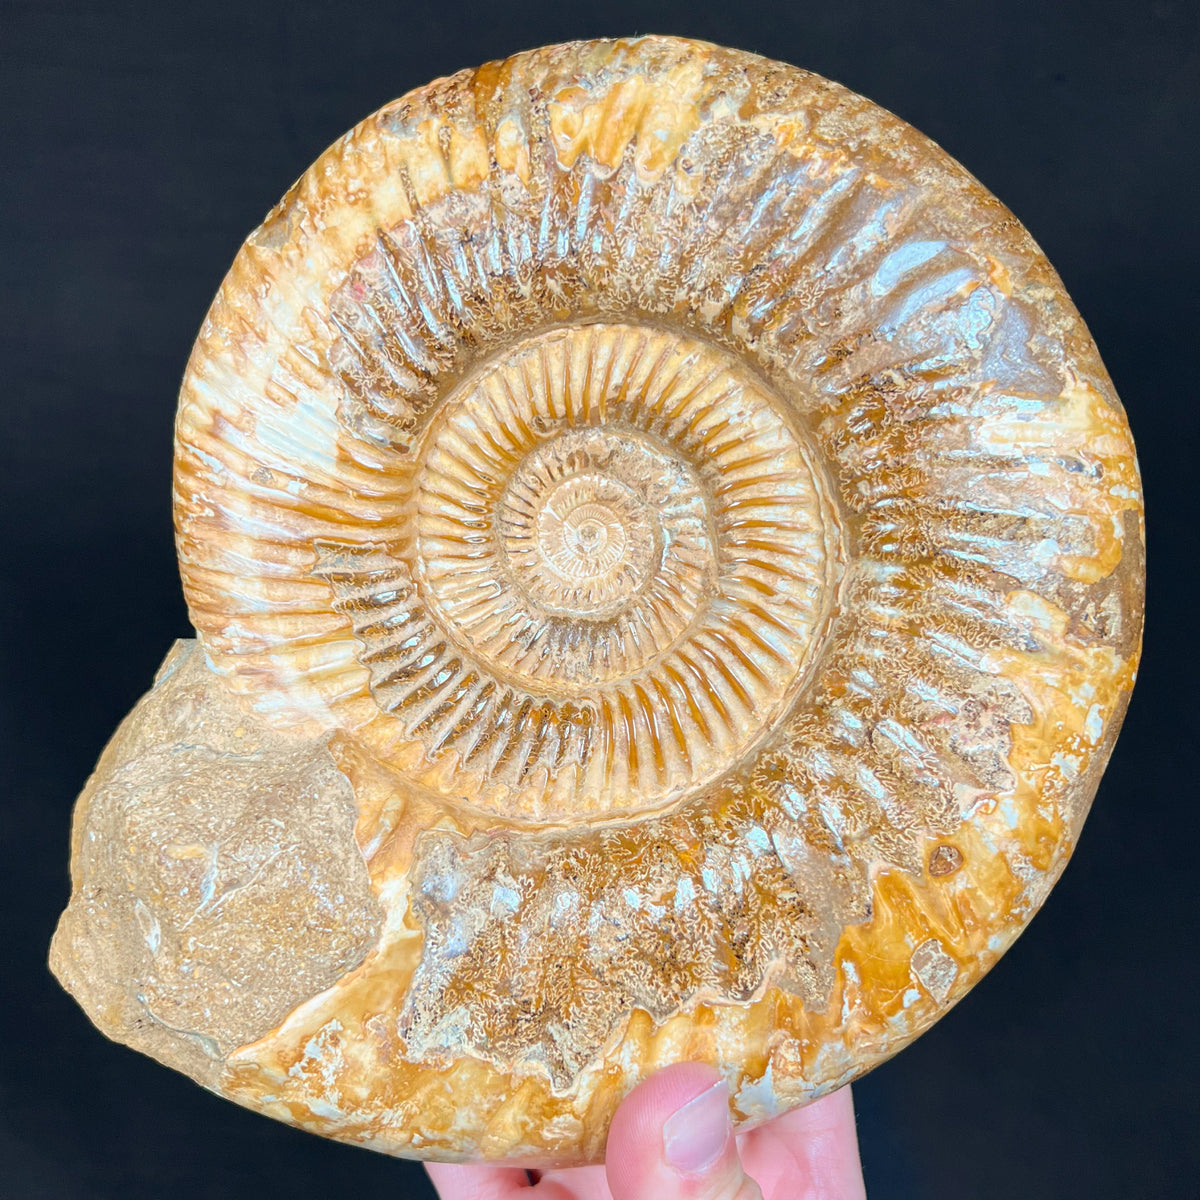 Large Fossilized Ammonite Shell Tan, Cream and White